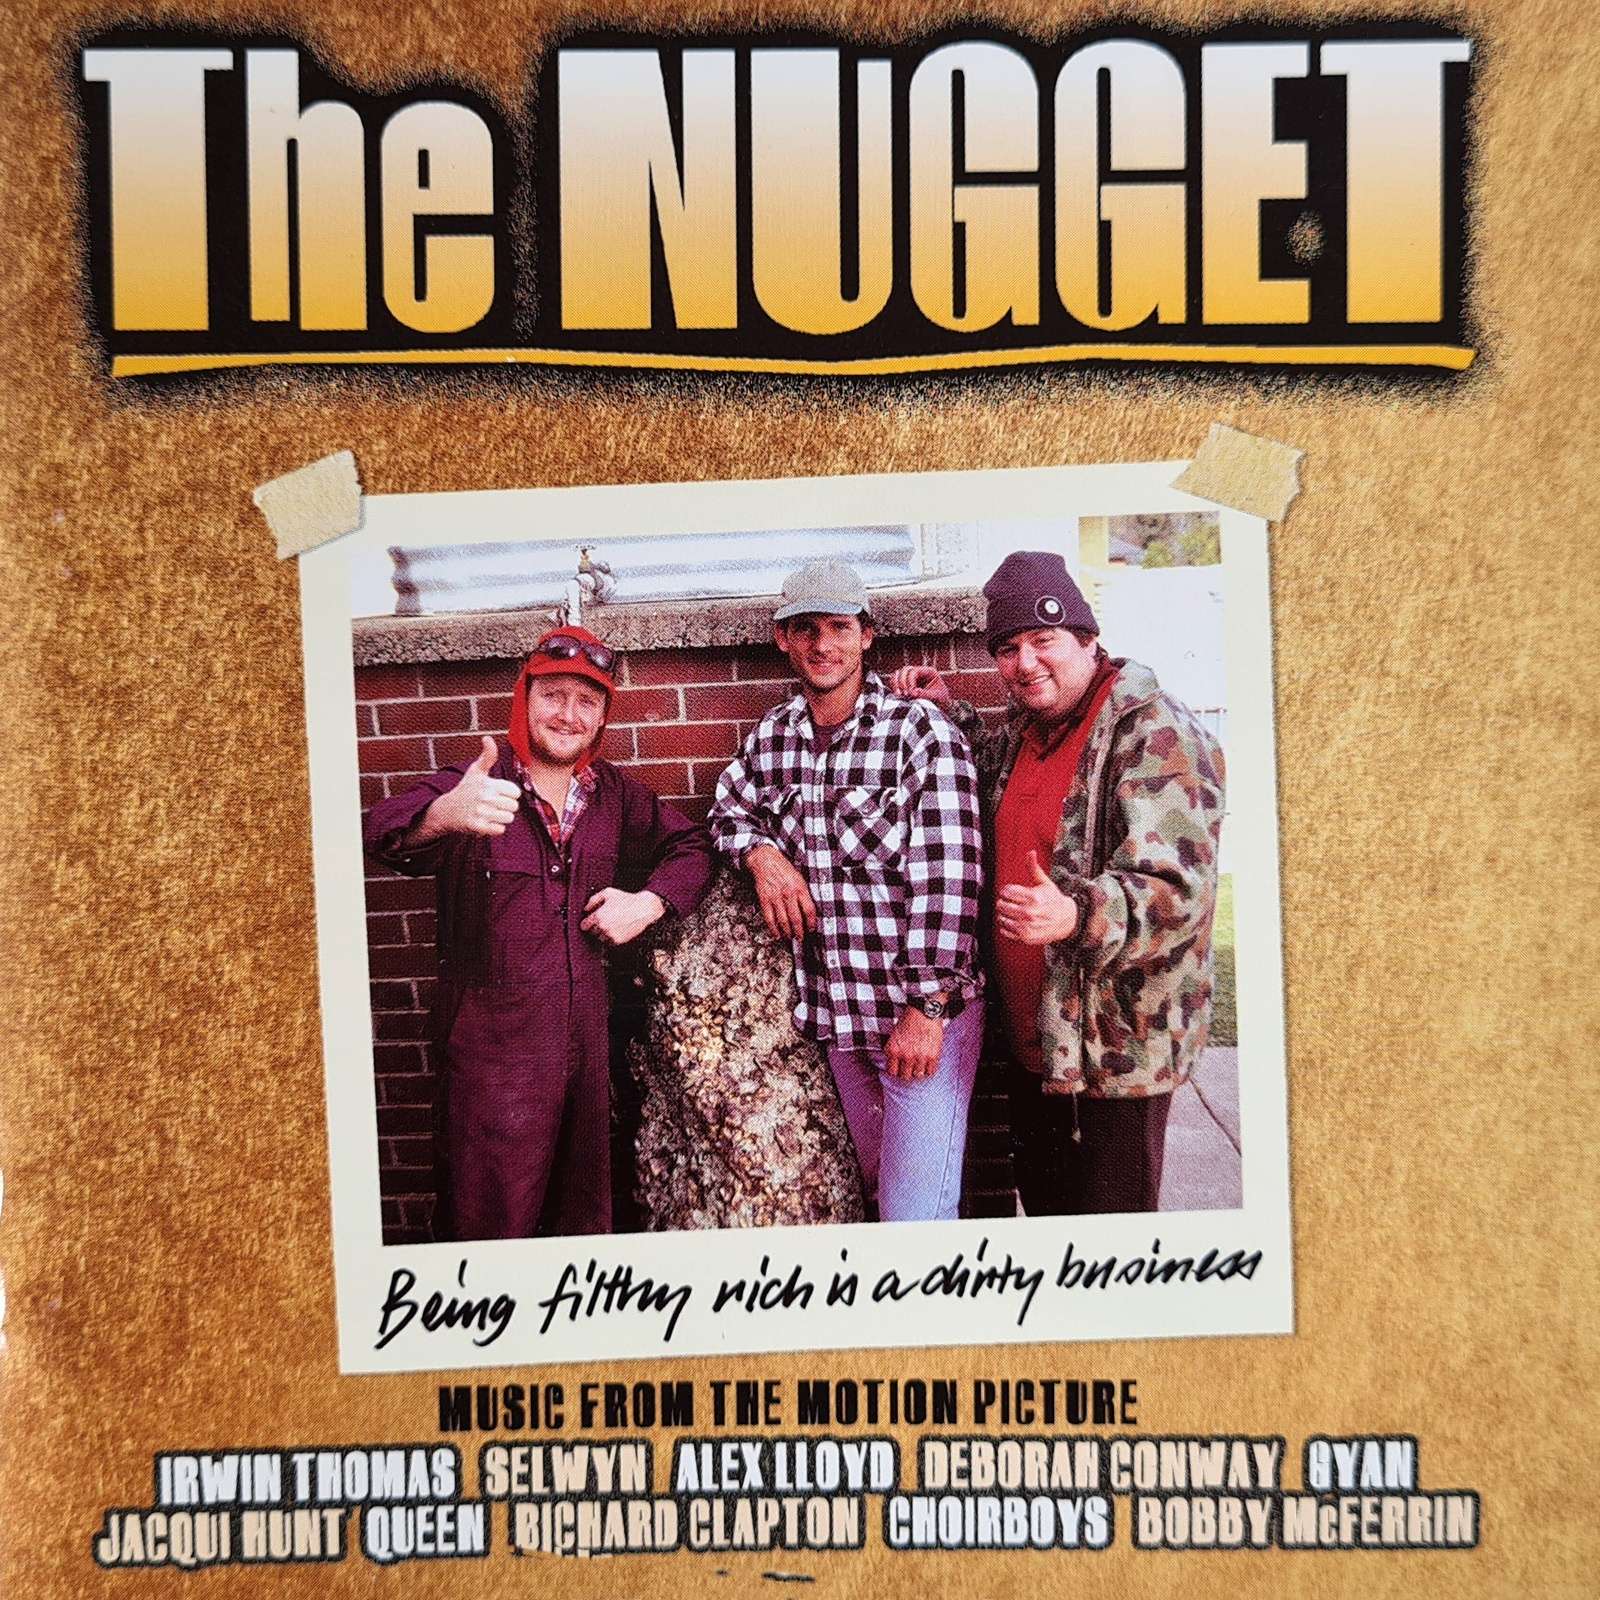 The Nugget - Music from the Motion Picture (CD)